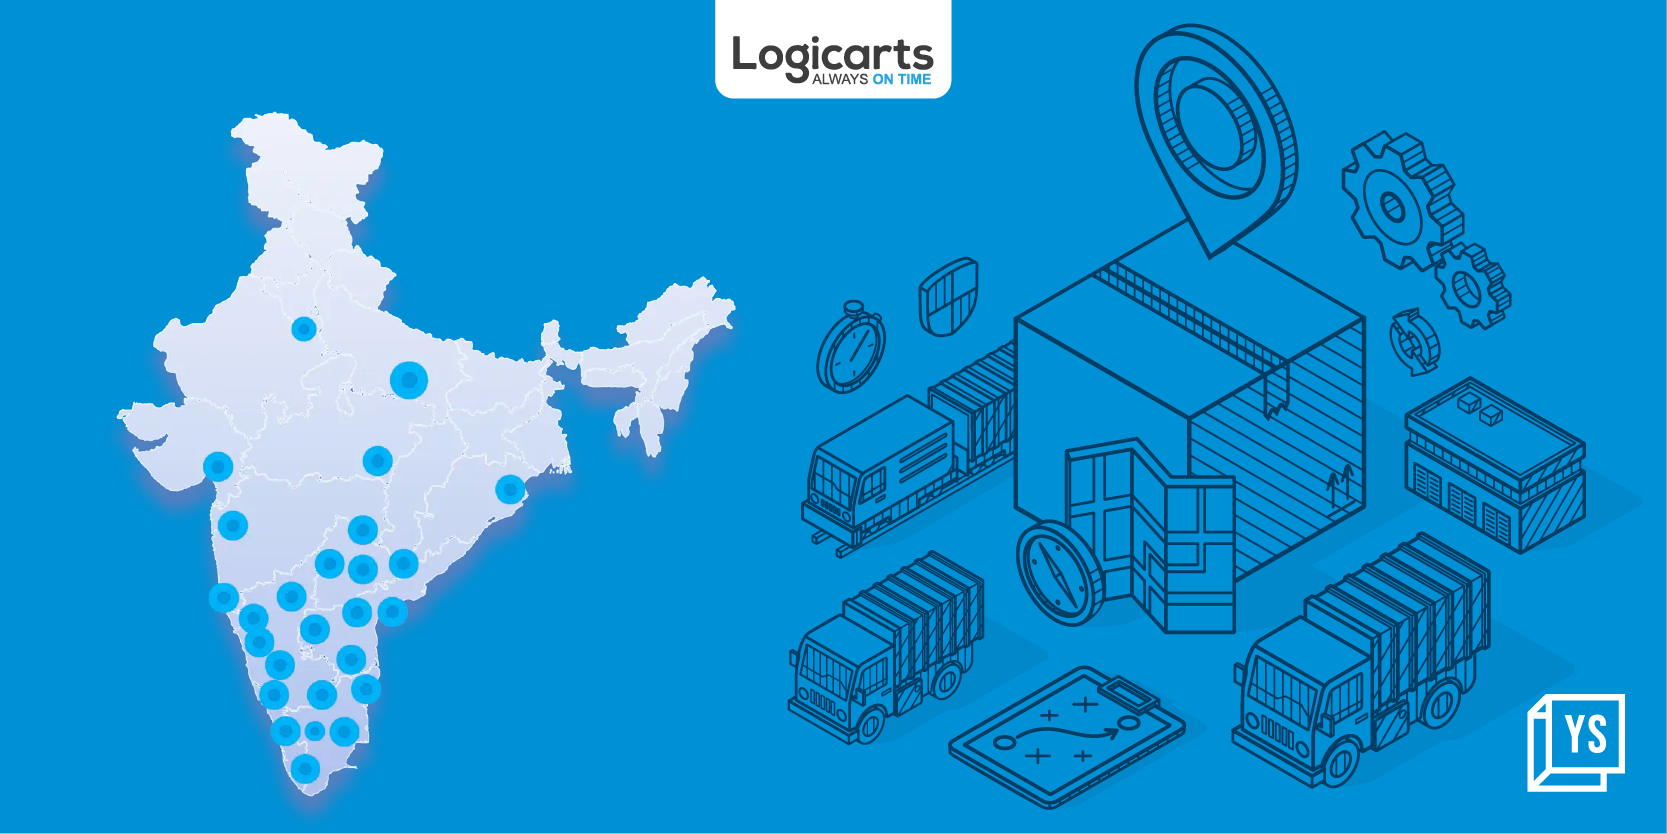 Embracing technology: Logicarts' recipe for efficiency and growth